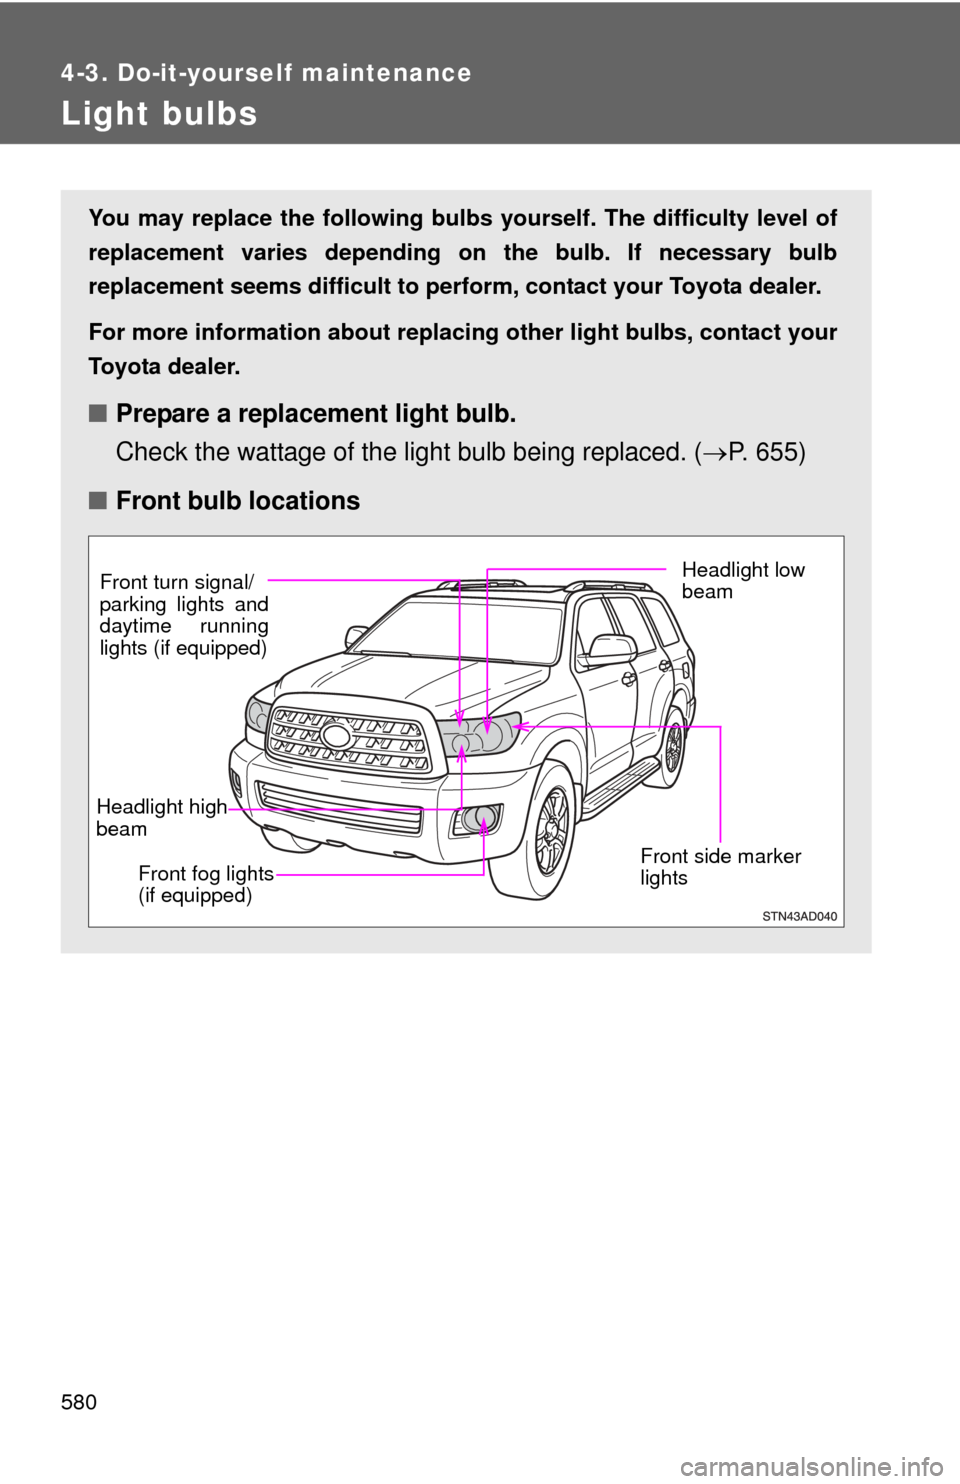 TOYOTA SEQUOIA 2012 2.G Owners Manual 580
4-3. Do-it-yourself maintenance
Light bulbs
You may replace the following bulbs yourself. The difficulty level of
replacement varies depending on the bulb. If necessary bulb
replacement seems diff